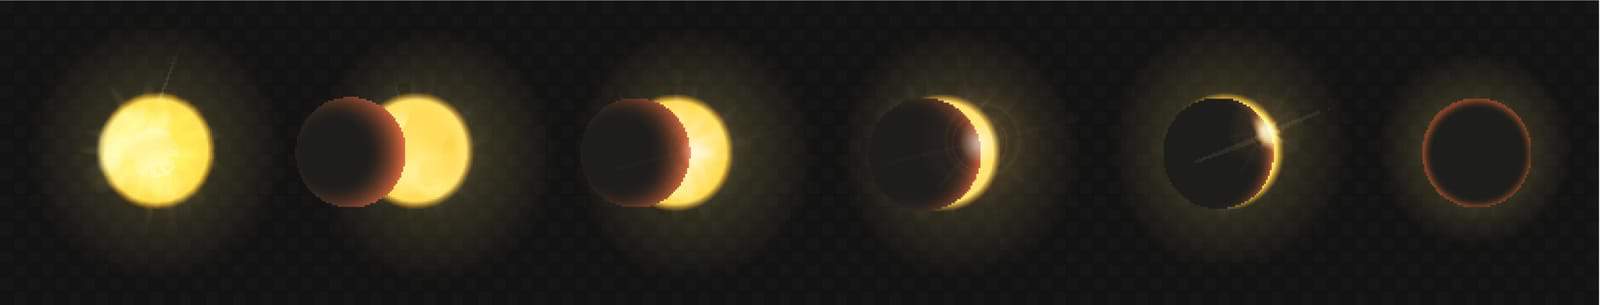 A series of yellow and orange circles on a black background.